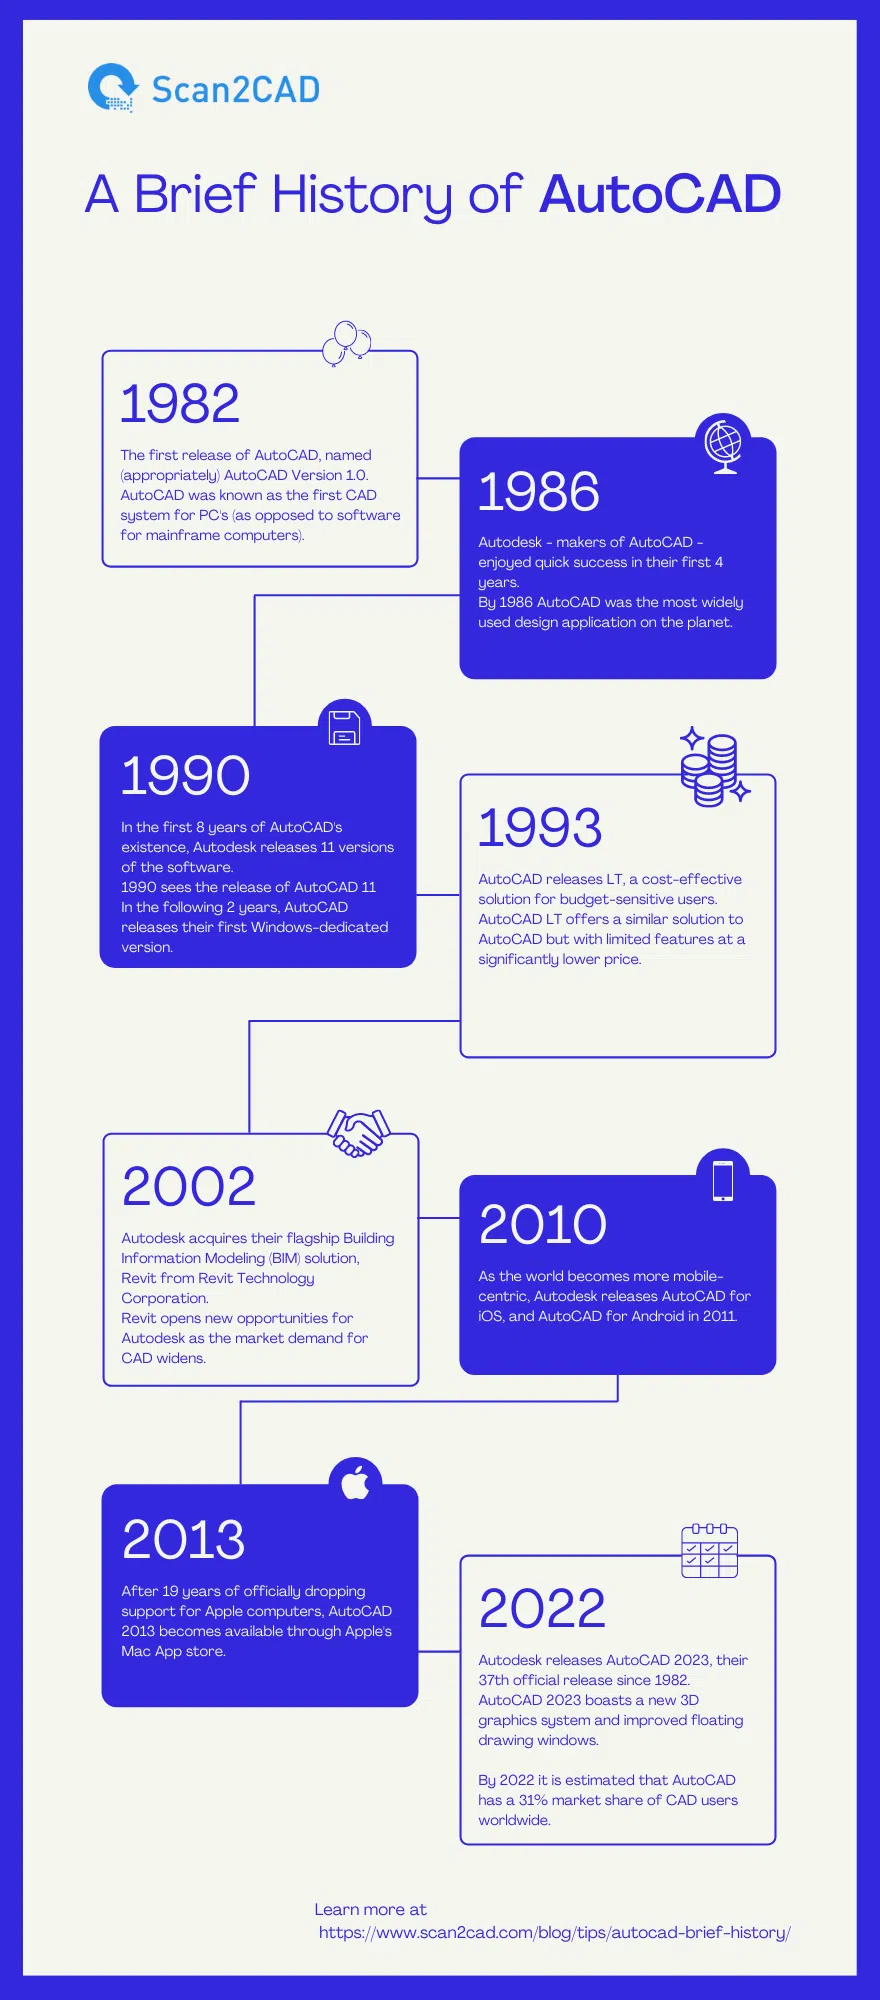 Infographic showing AutoCAD's history 1982 to 2022